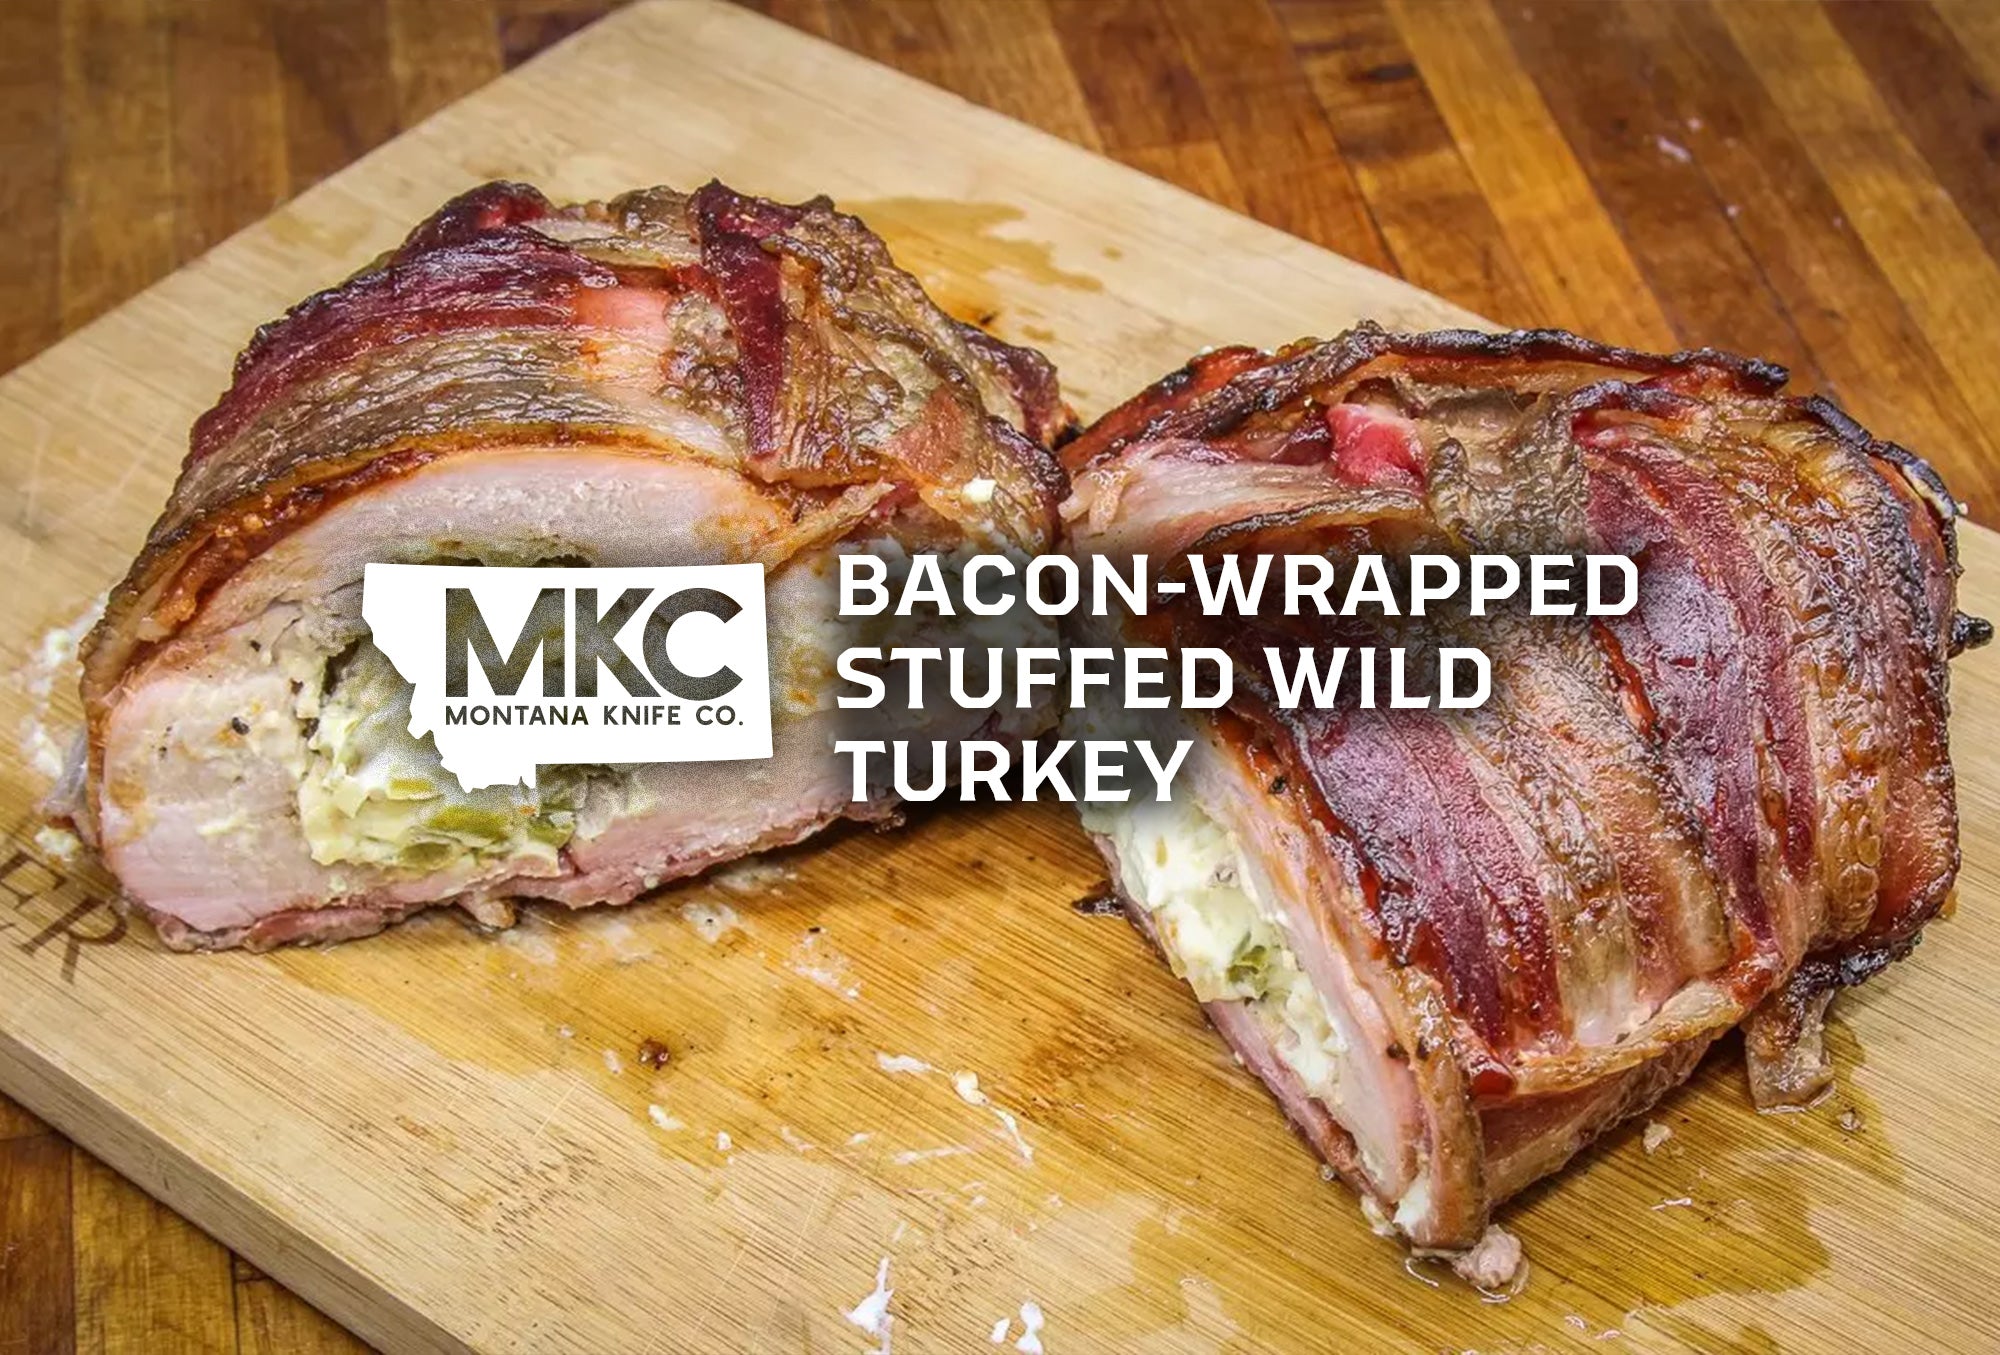 A close-up shot of the bacon-wrapped stuffed wild turkey resting on a wooden cutting board.